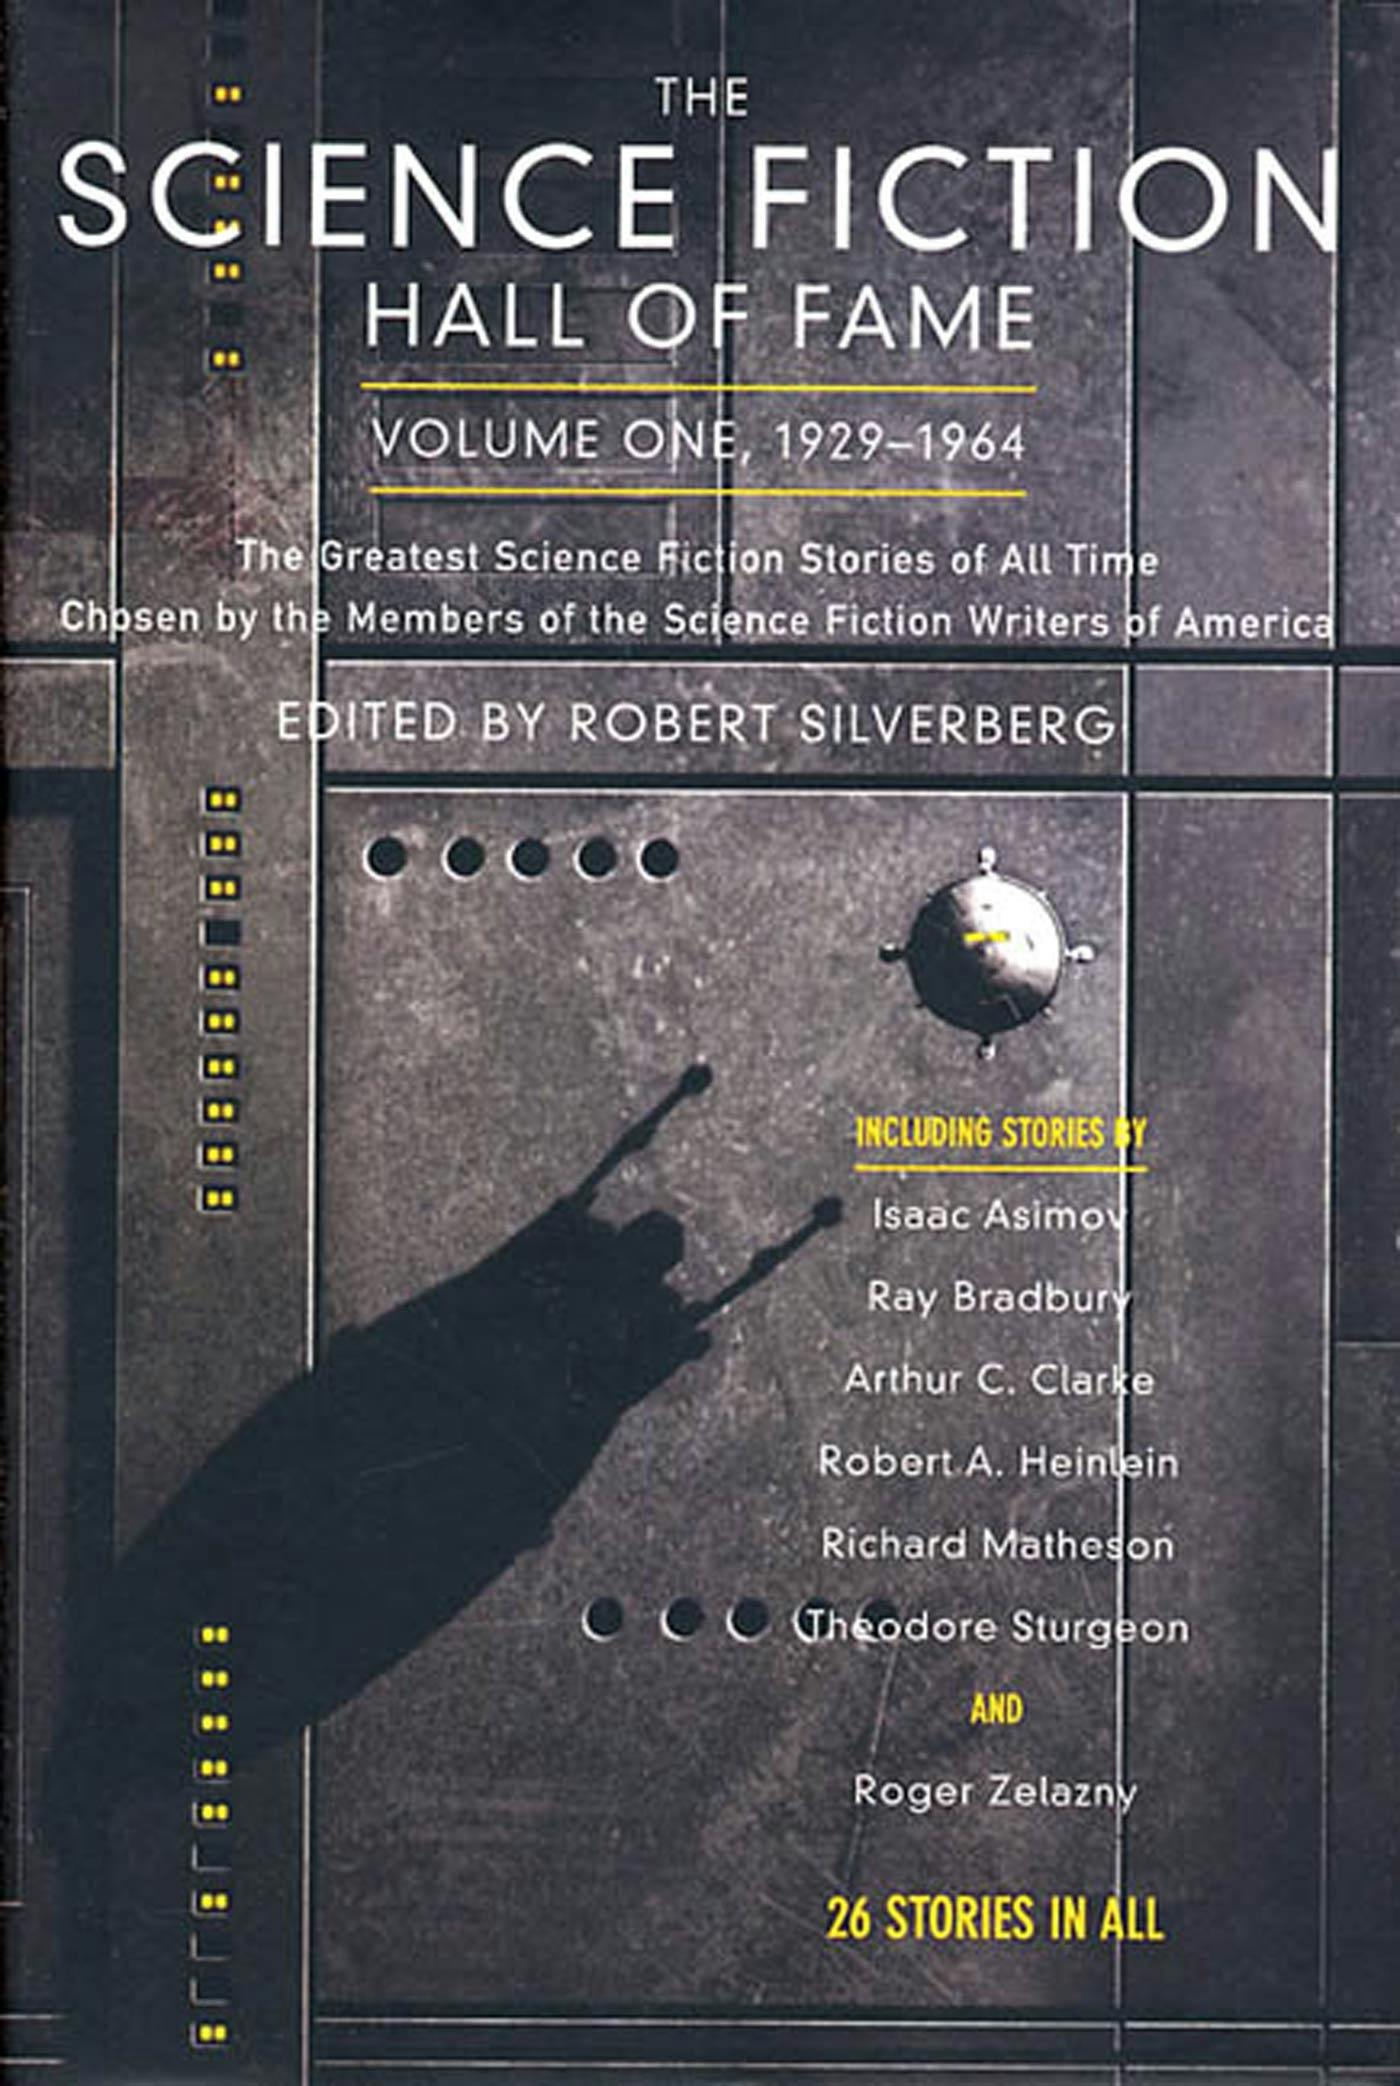 Cover for the book titled as: The Science Fiction Hall of Fame, Volume One 1929-1964